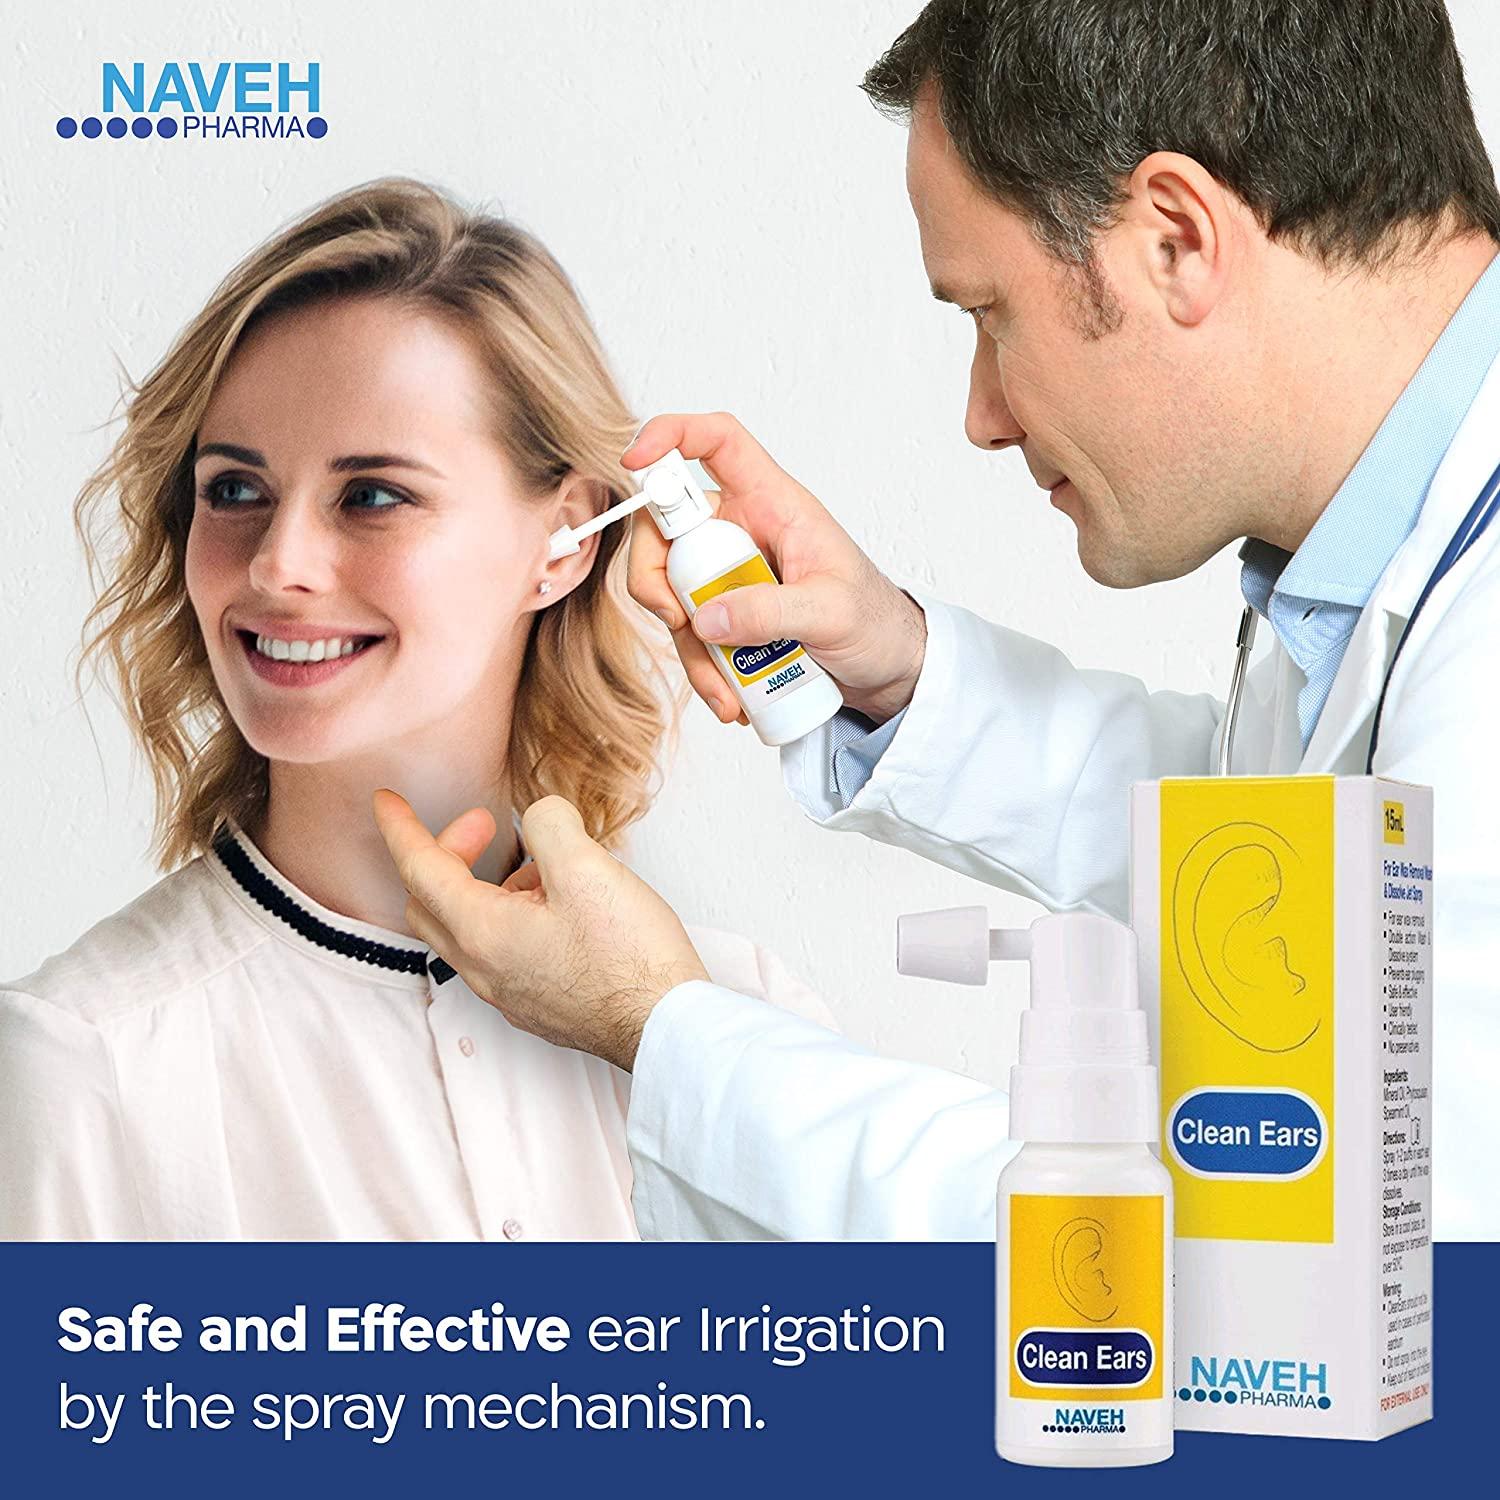 Hear Clear With Styvechale Pharmacy. Book Our Ear Irrigation Service!